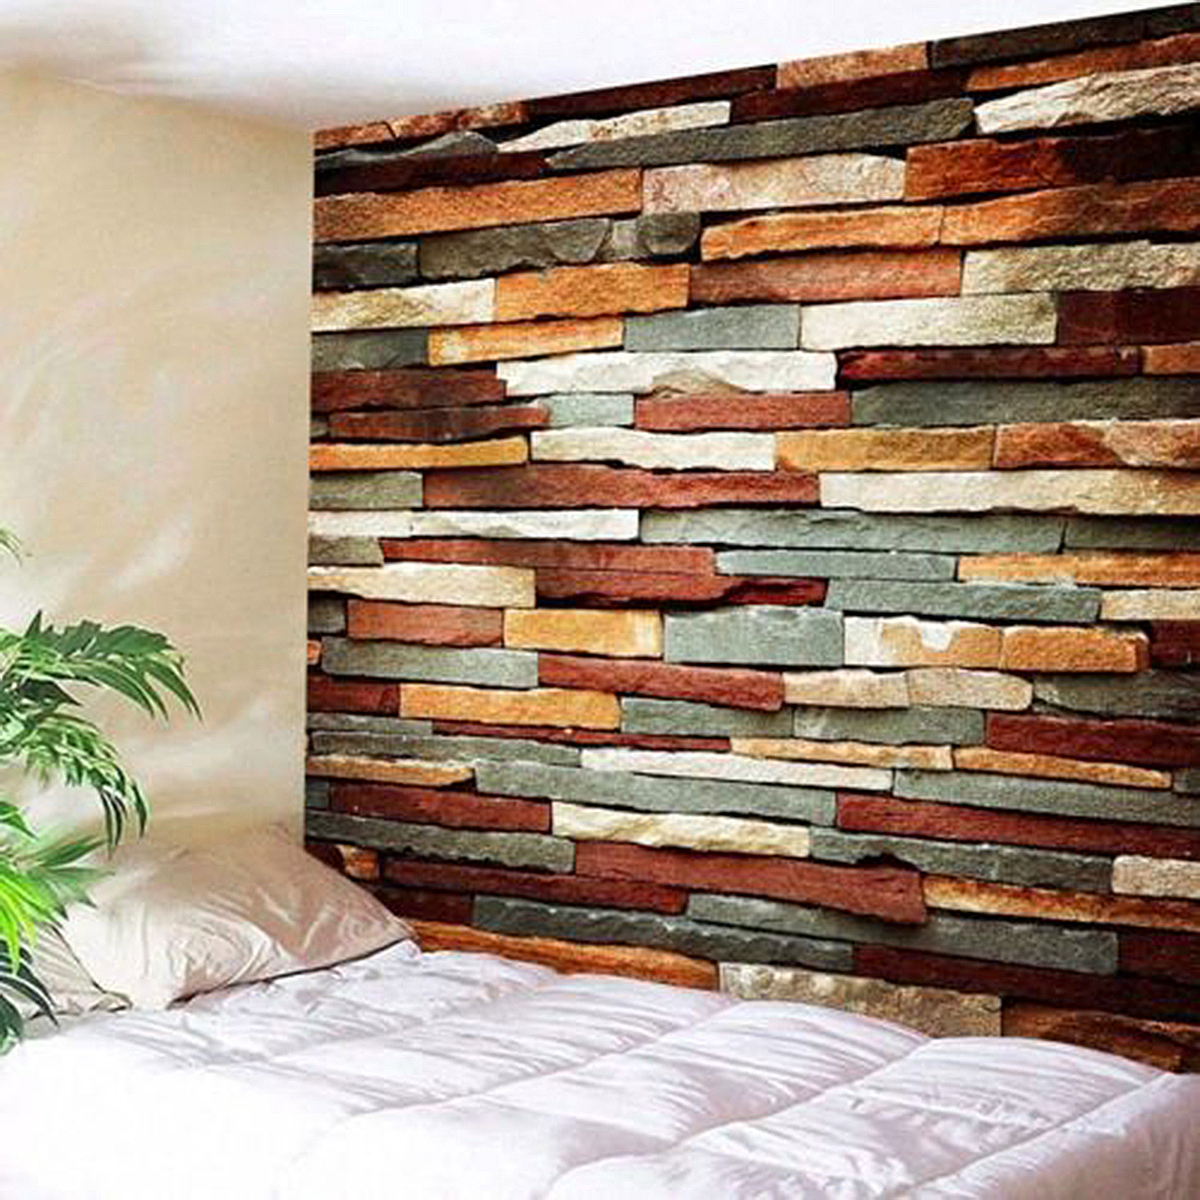 

3D Art Decorations Brick Stone Print Pattern Bedspread Wall Hanging Tapestry Home Room Decor